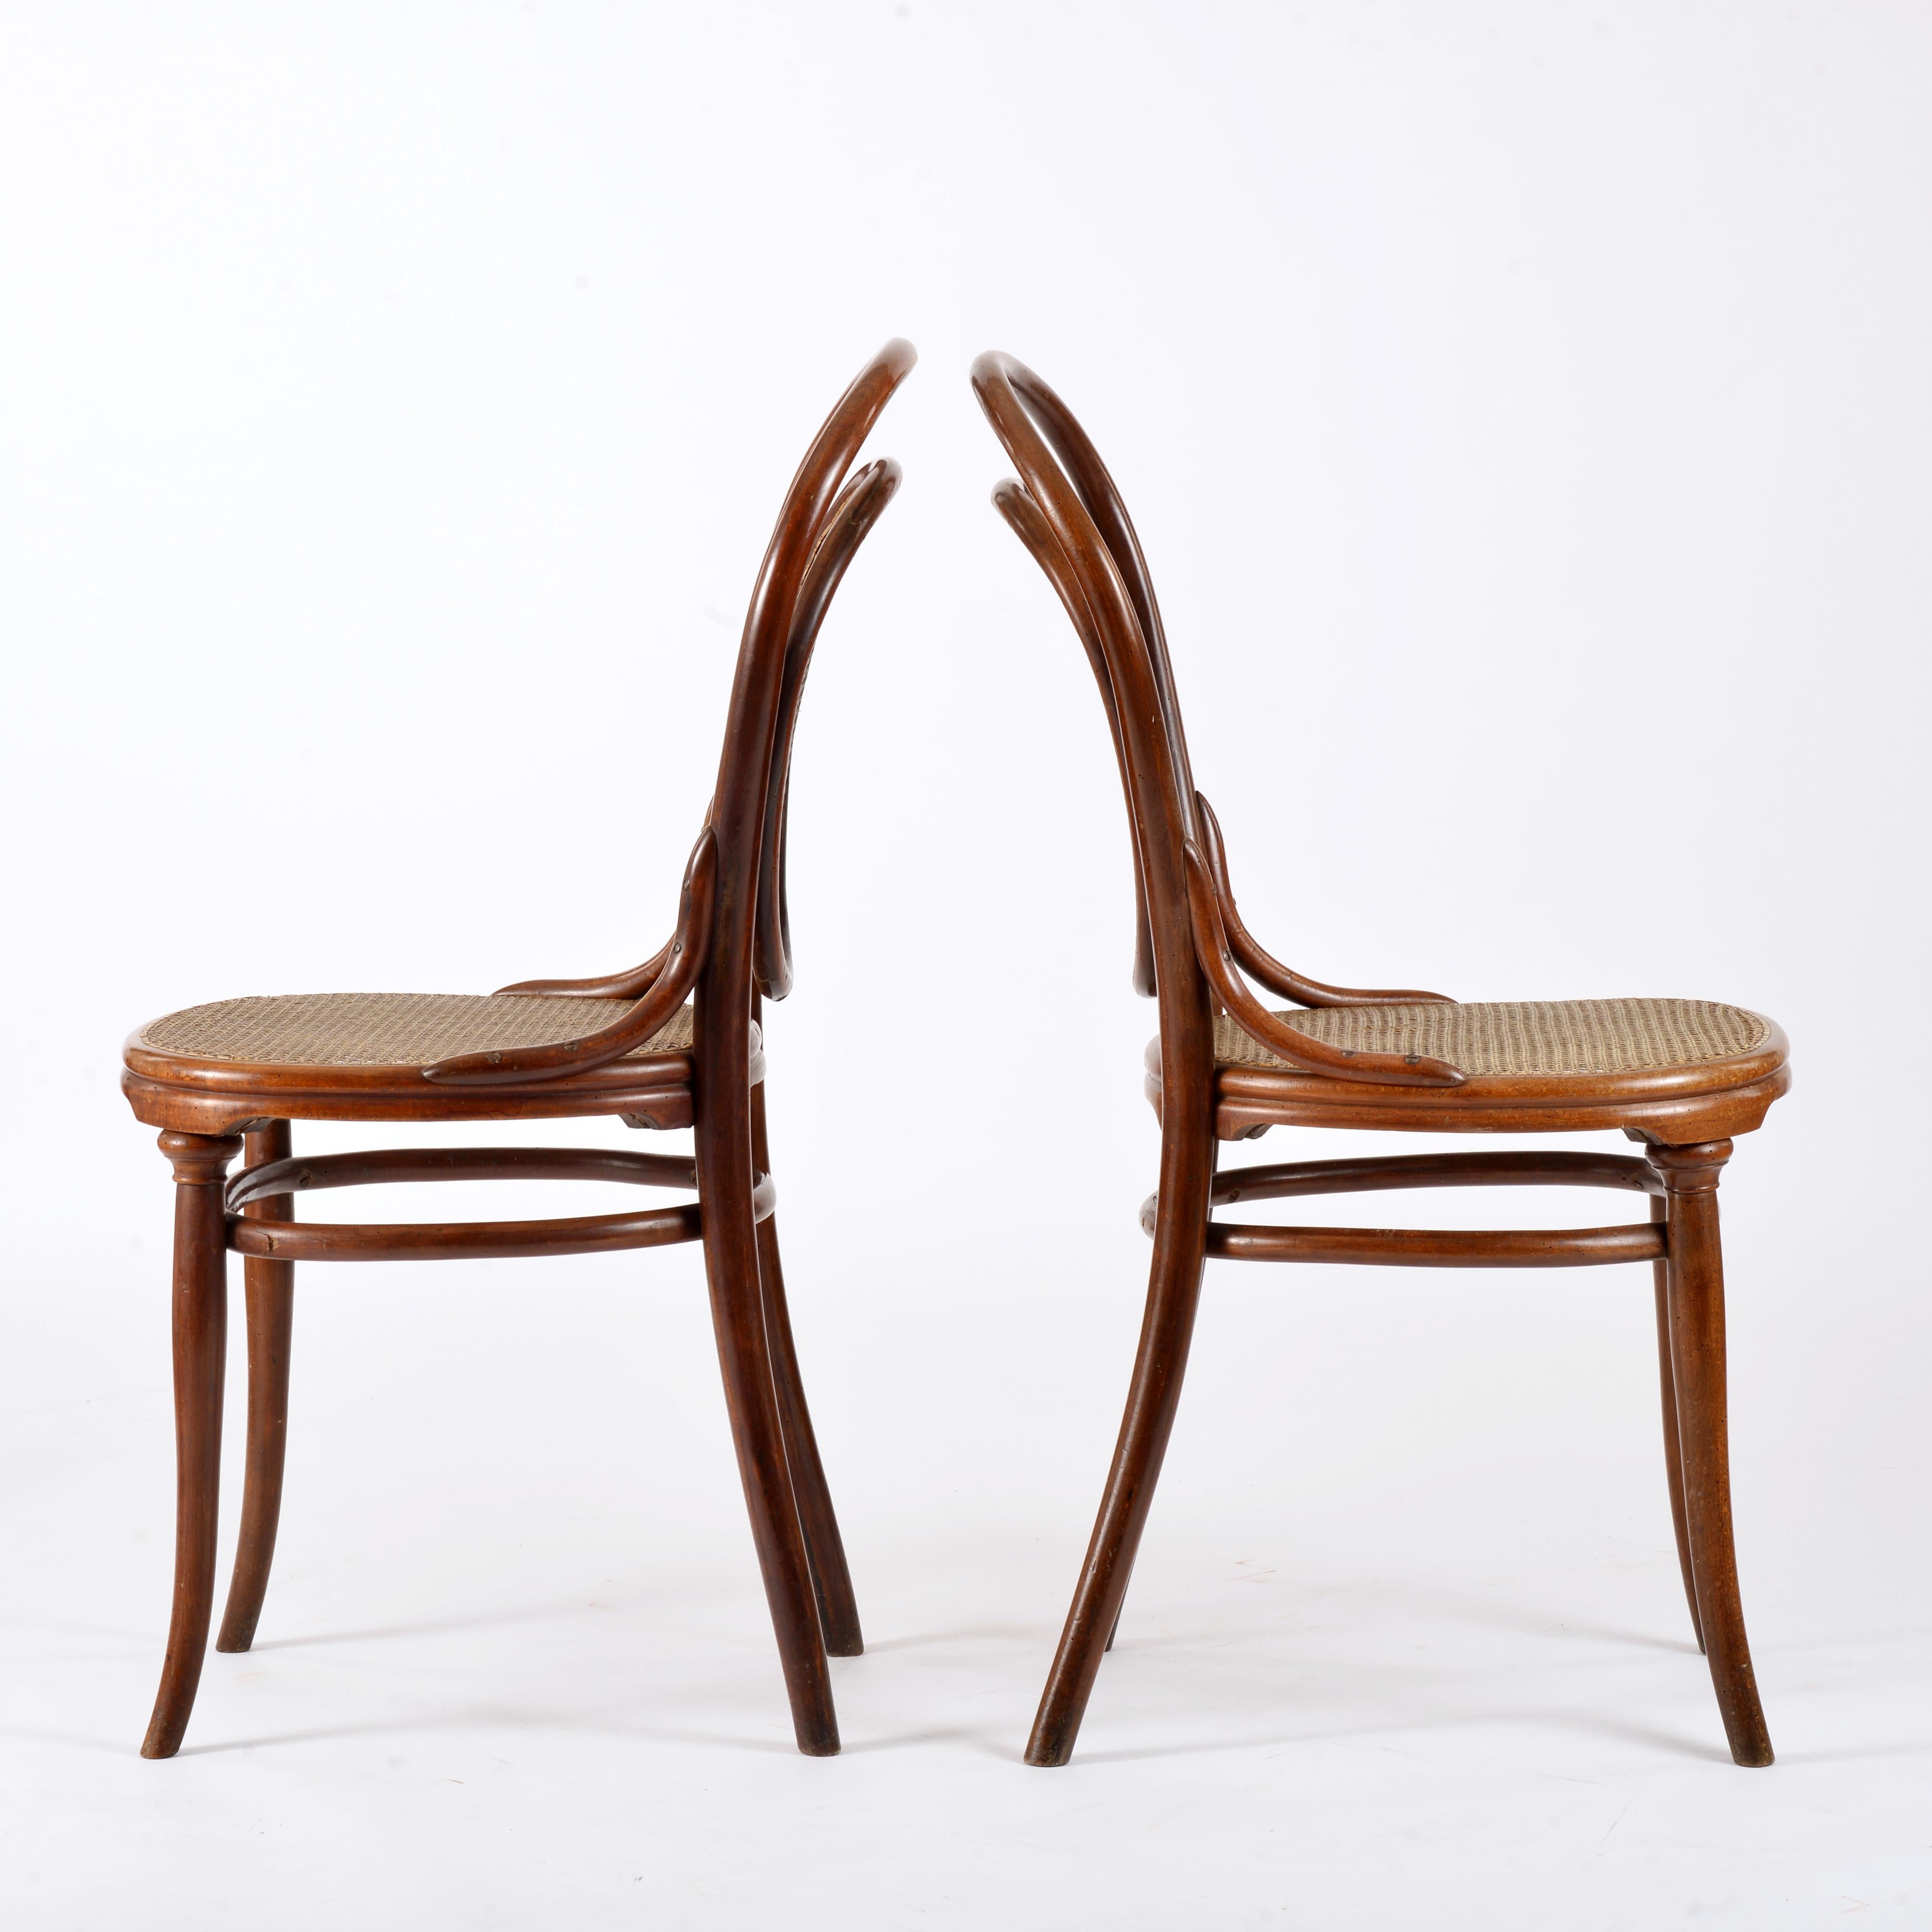 4 bentwood chairs, number 7, published by Thonet at the end of the 19th century. 3